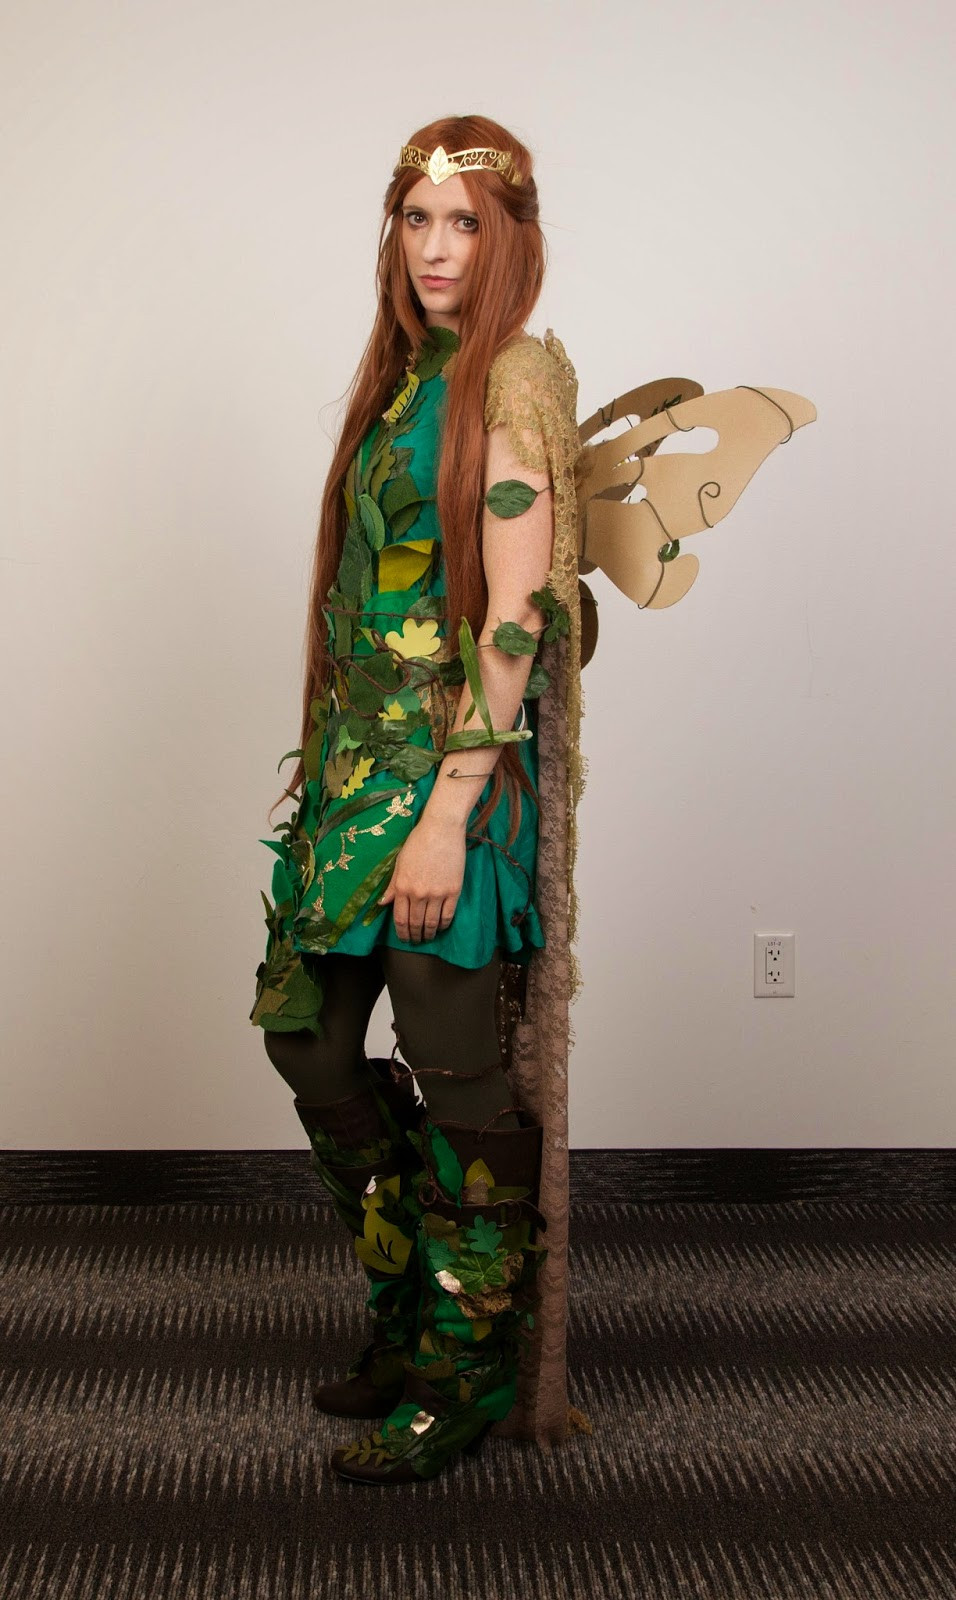 Woodland Fairy Costume DIY
 The How To Gal Woodland Fairy Costume